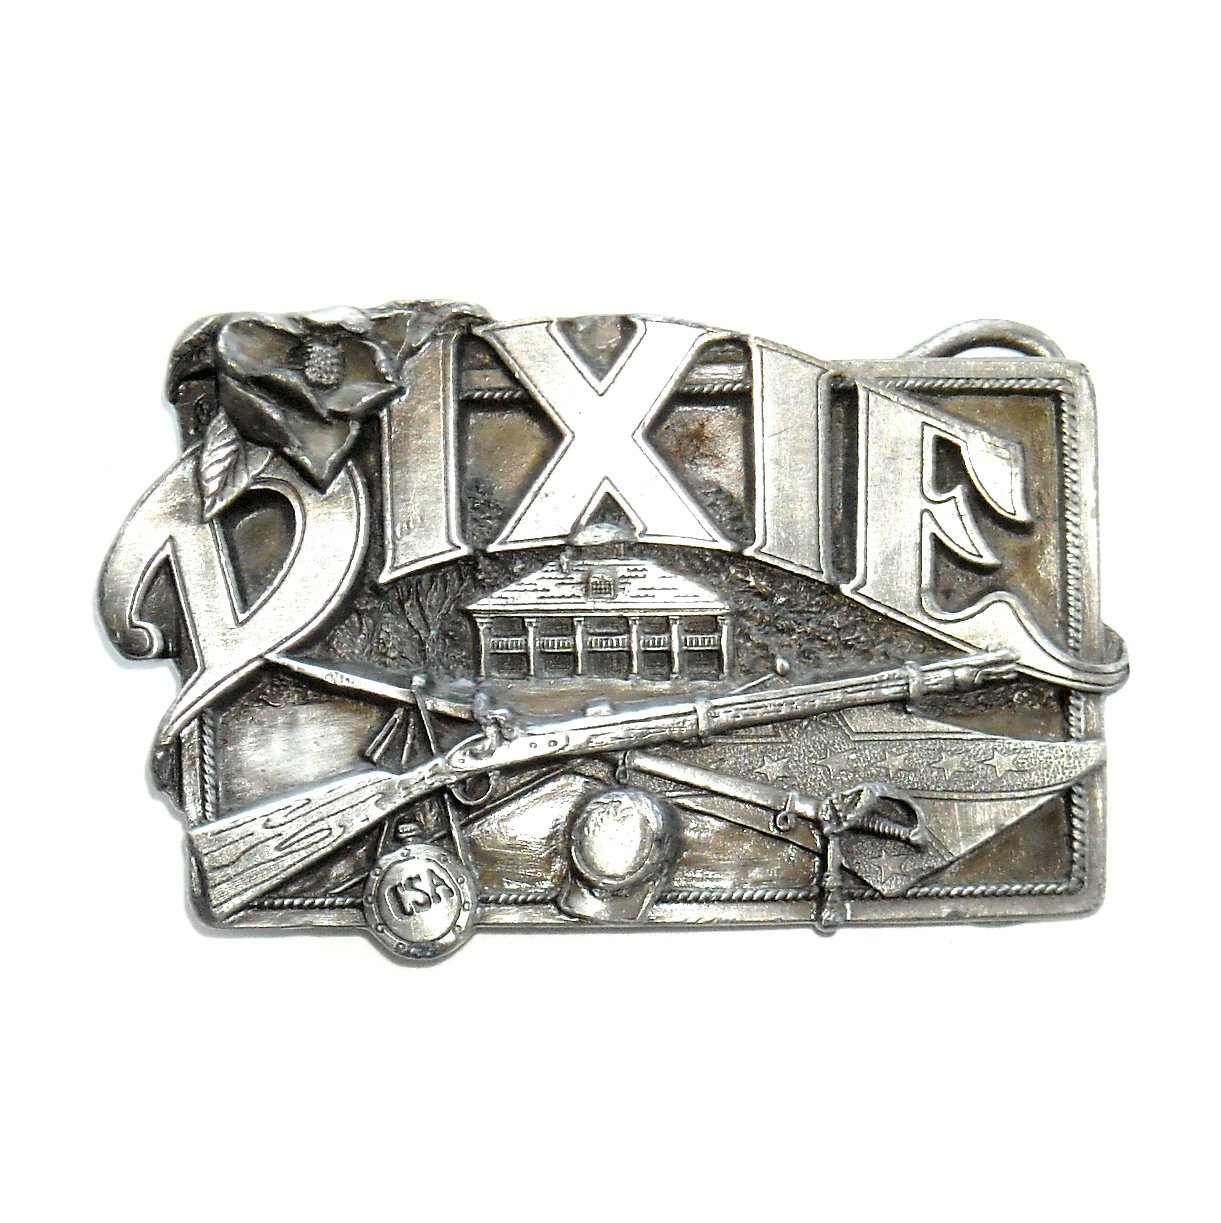 VTG. I'D RATHER BE FISHING BELT BUCKLE GREAT AMERICAN BUCKLES